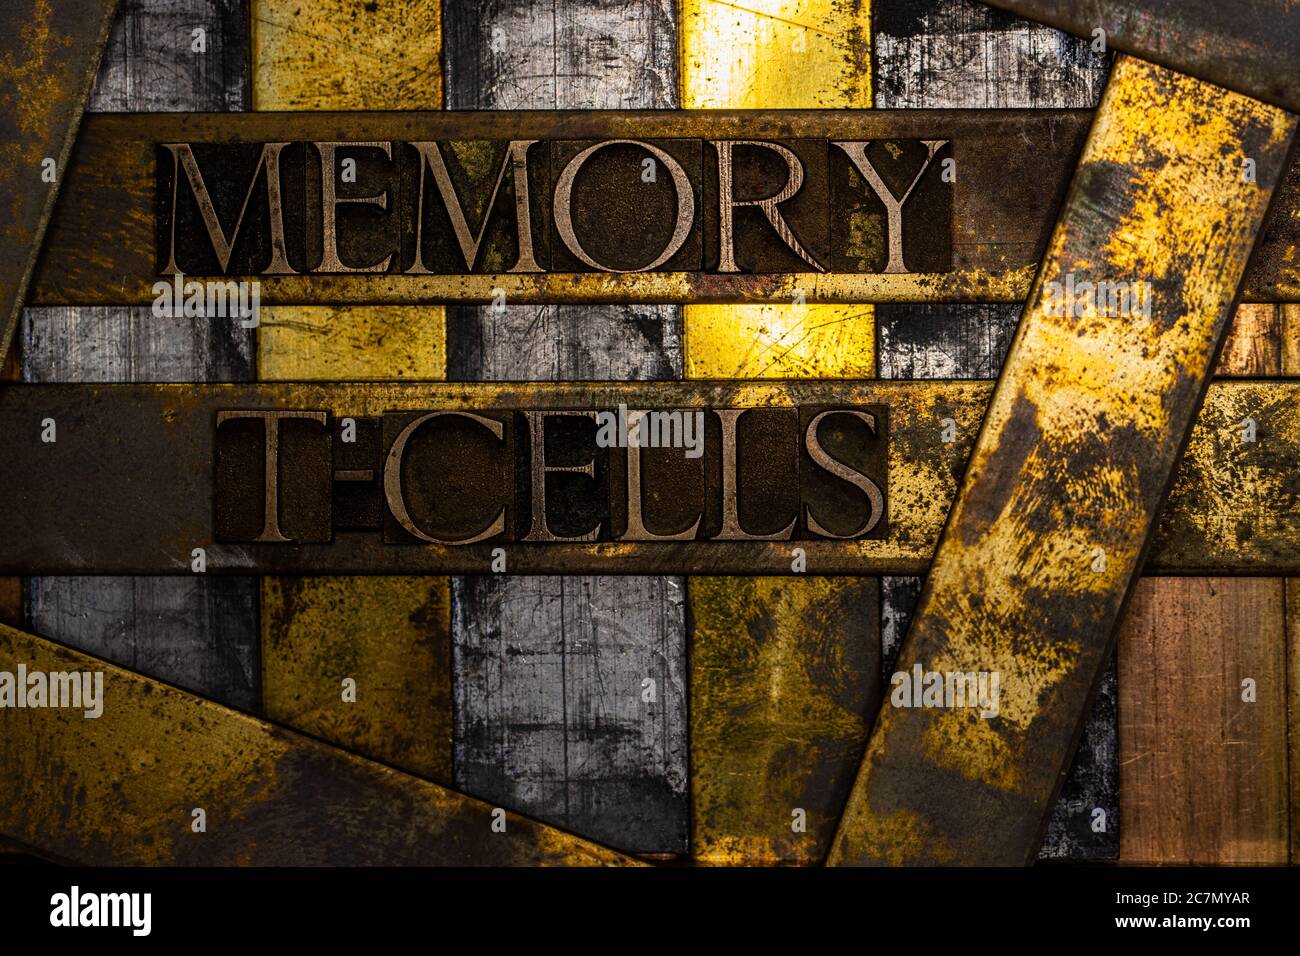 Memory T-Cells text formed with real authentic typeset letters on vintage textured silver grunge copper and gold background Stock Photo